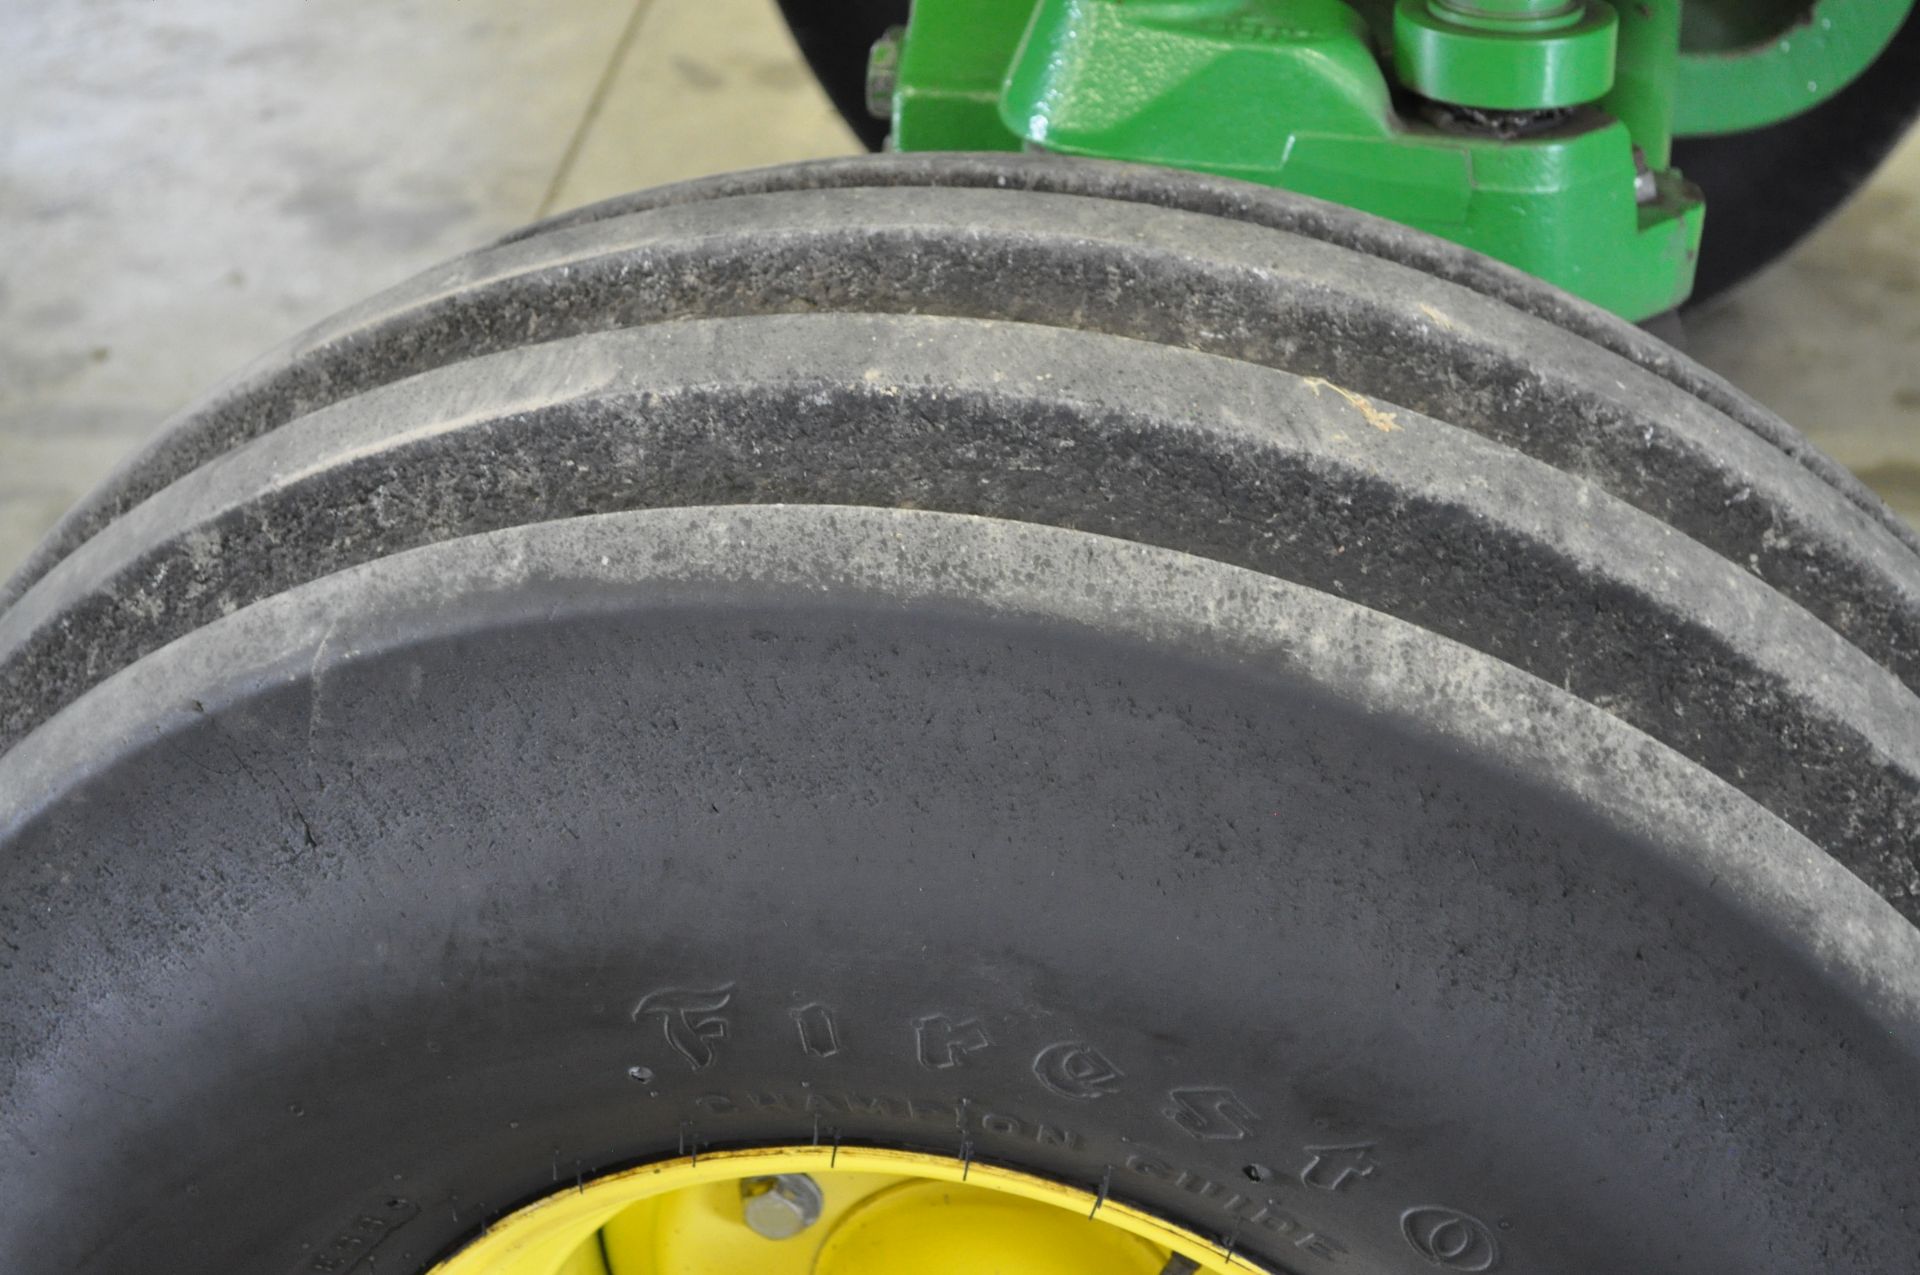 John Deere 7720 tractor, 480 / 80 R 42 rear, 14 L-16.1 tires, 3 hyd remotes, 3 pt - Image 4 of 14